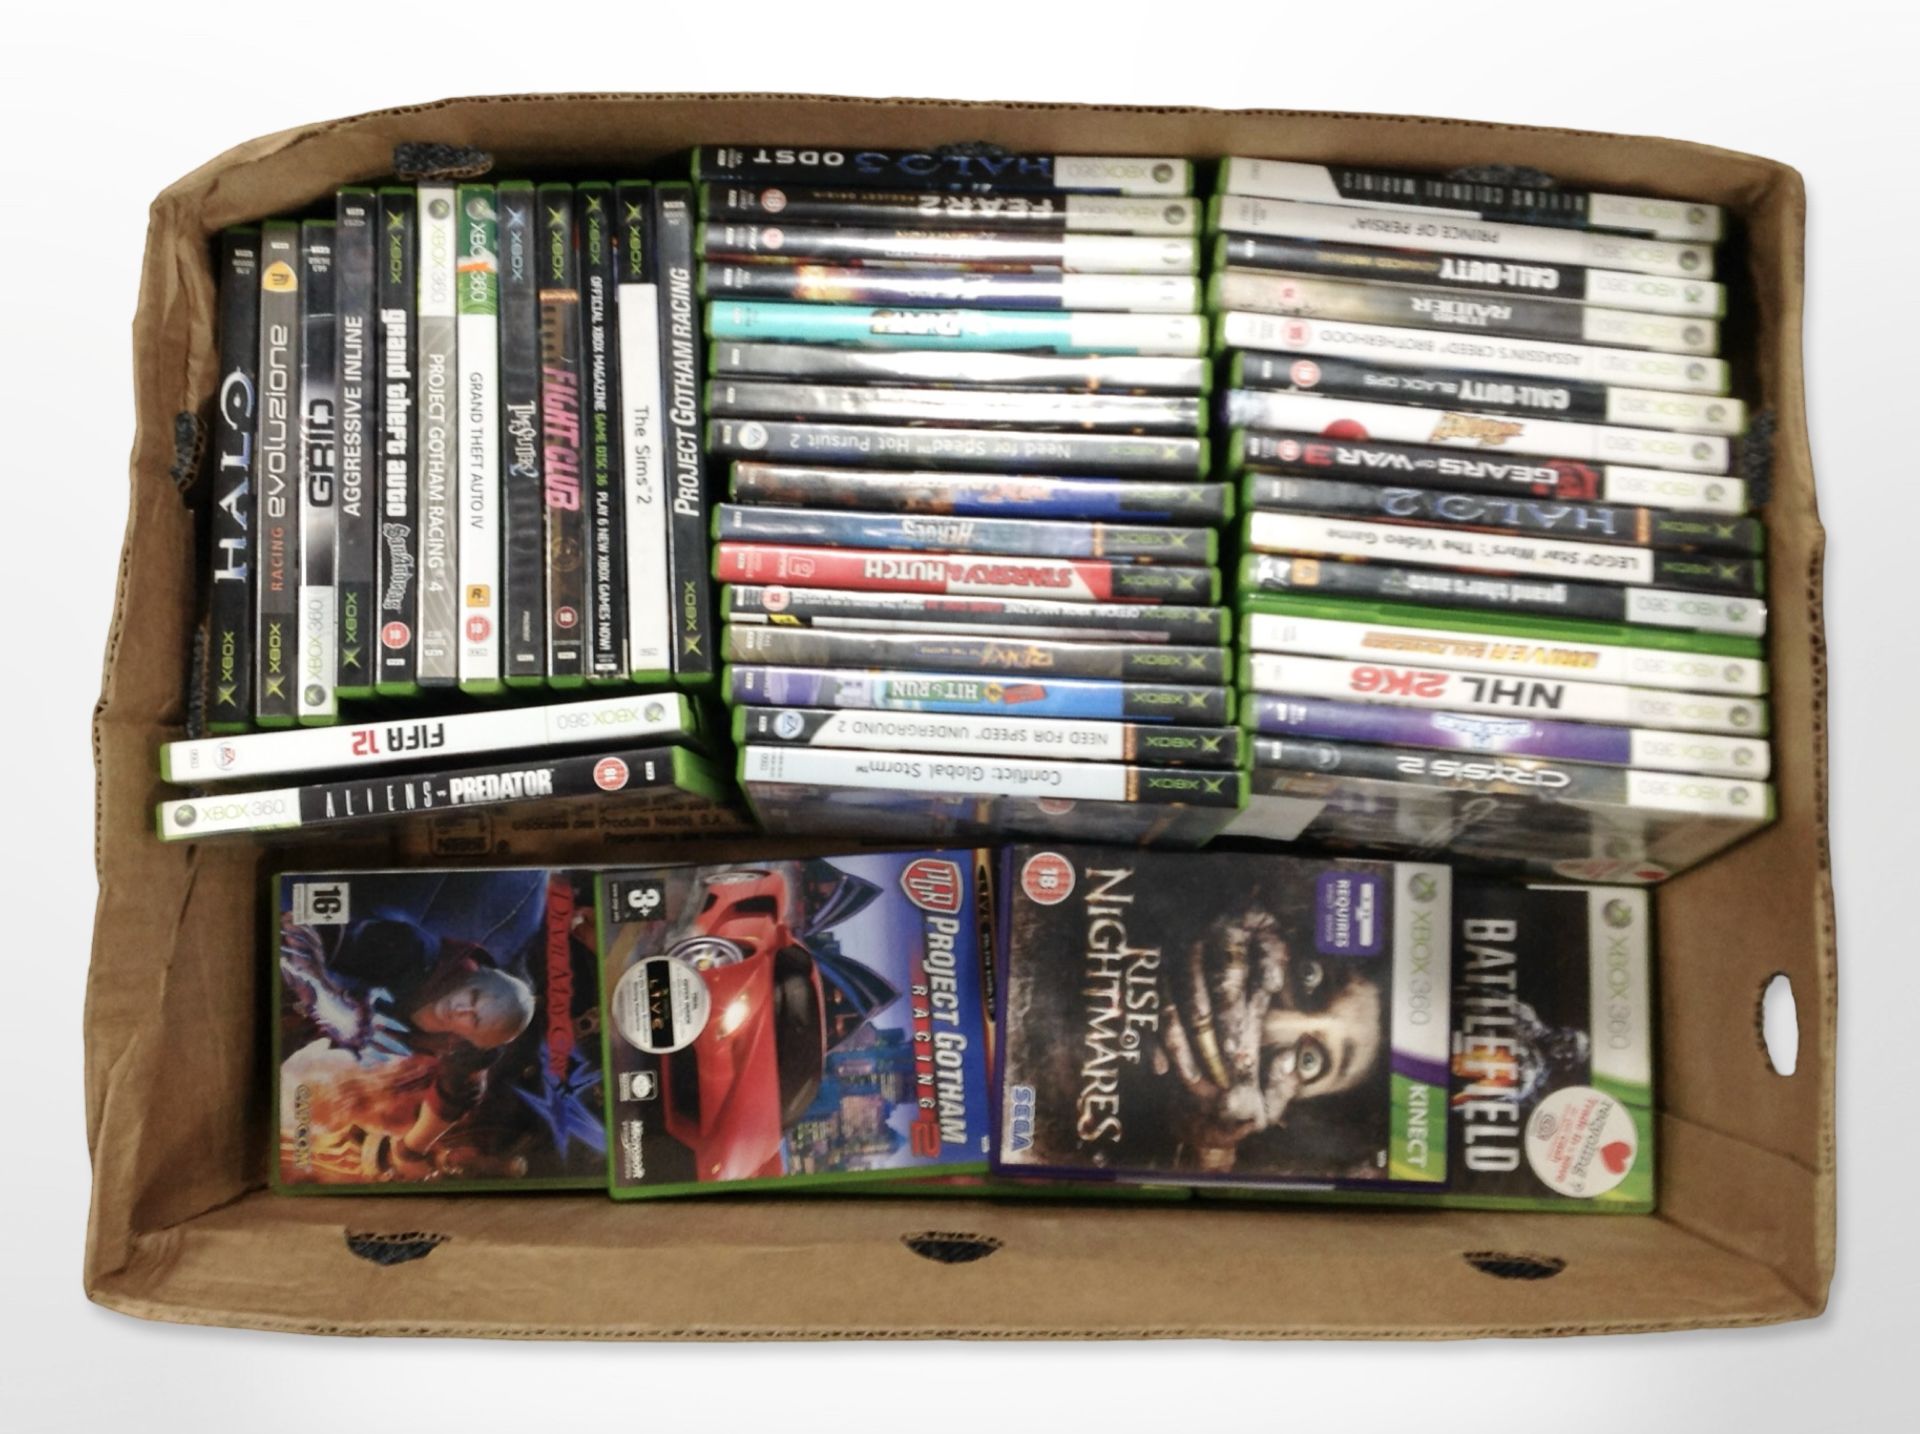 A quantity of Xbox and Xbox 360 videogames.